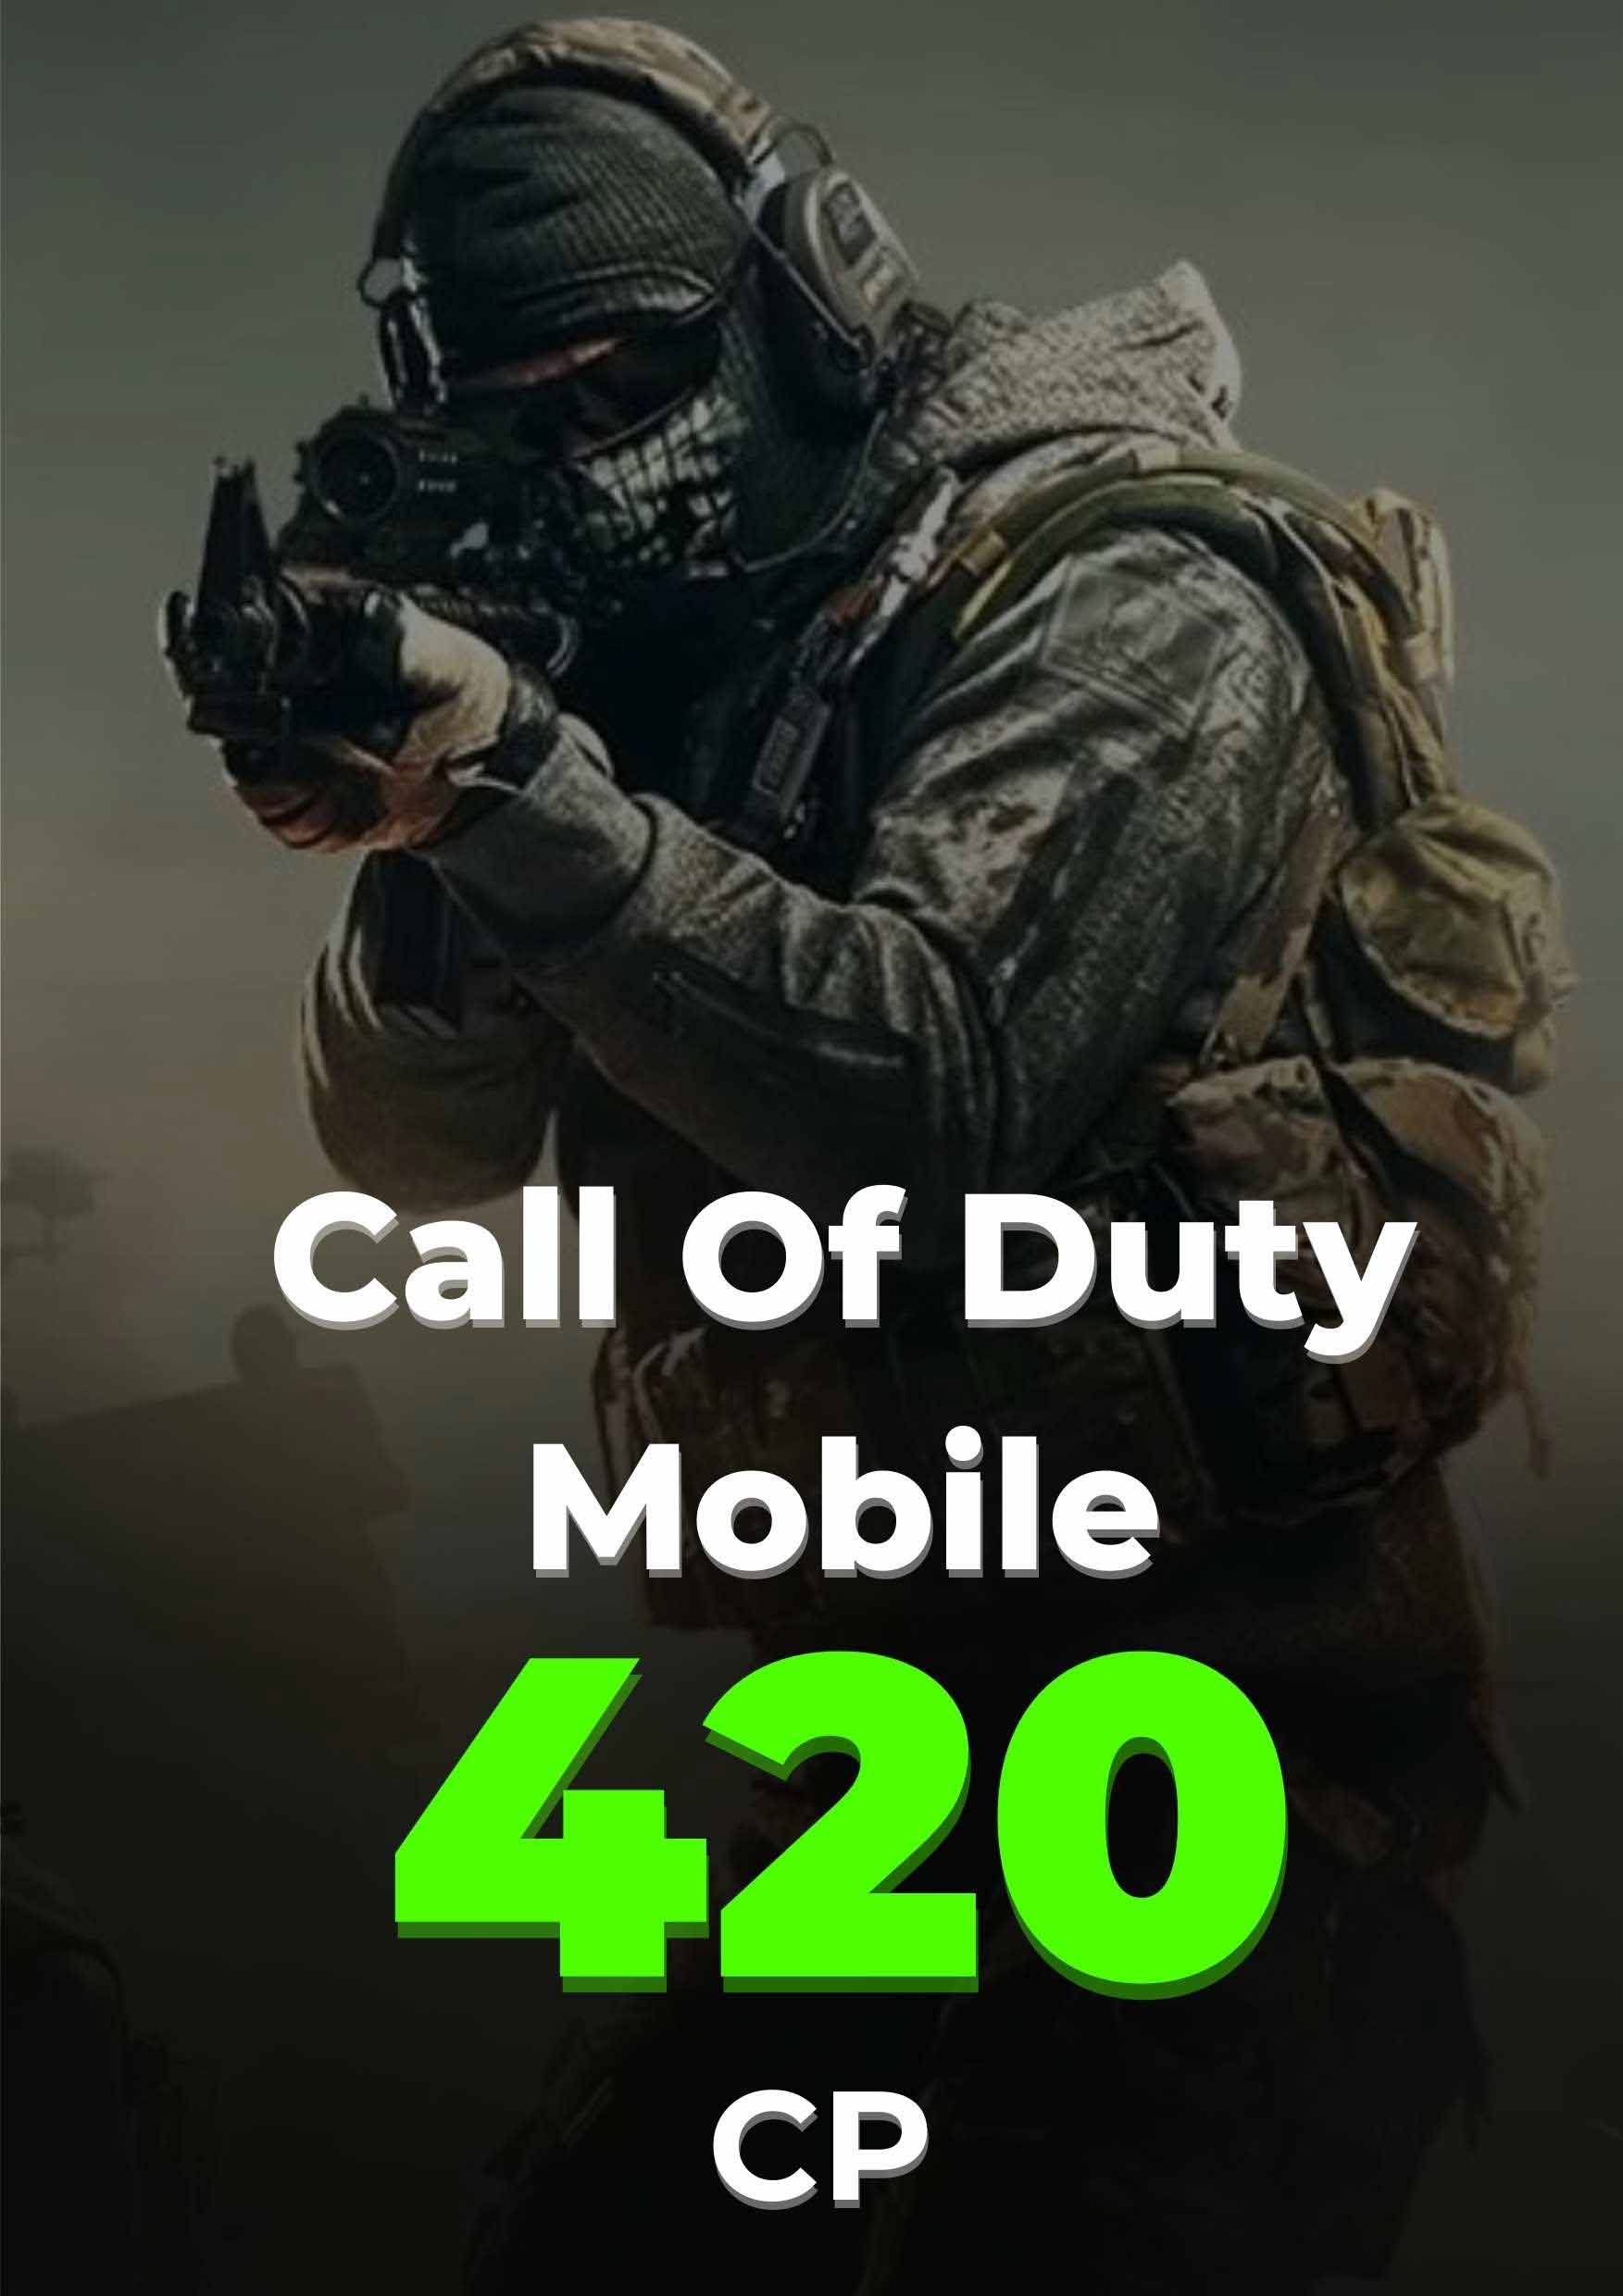 Call Of Duty Mobile 420 CP